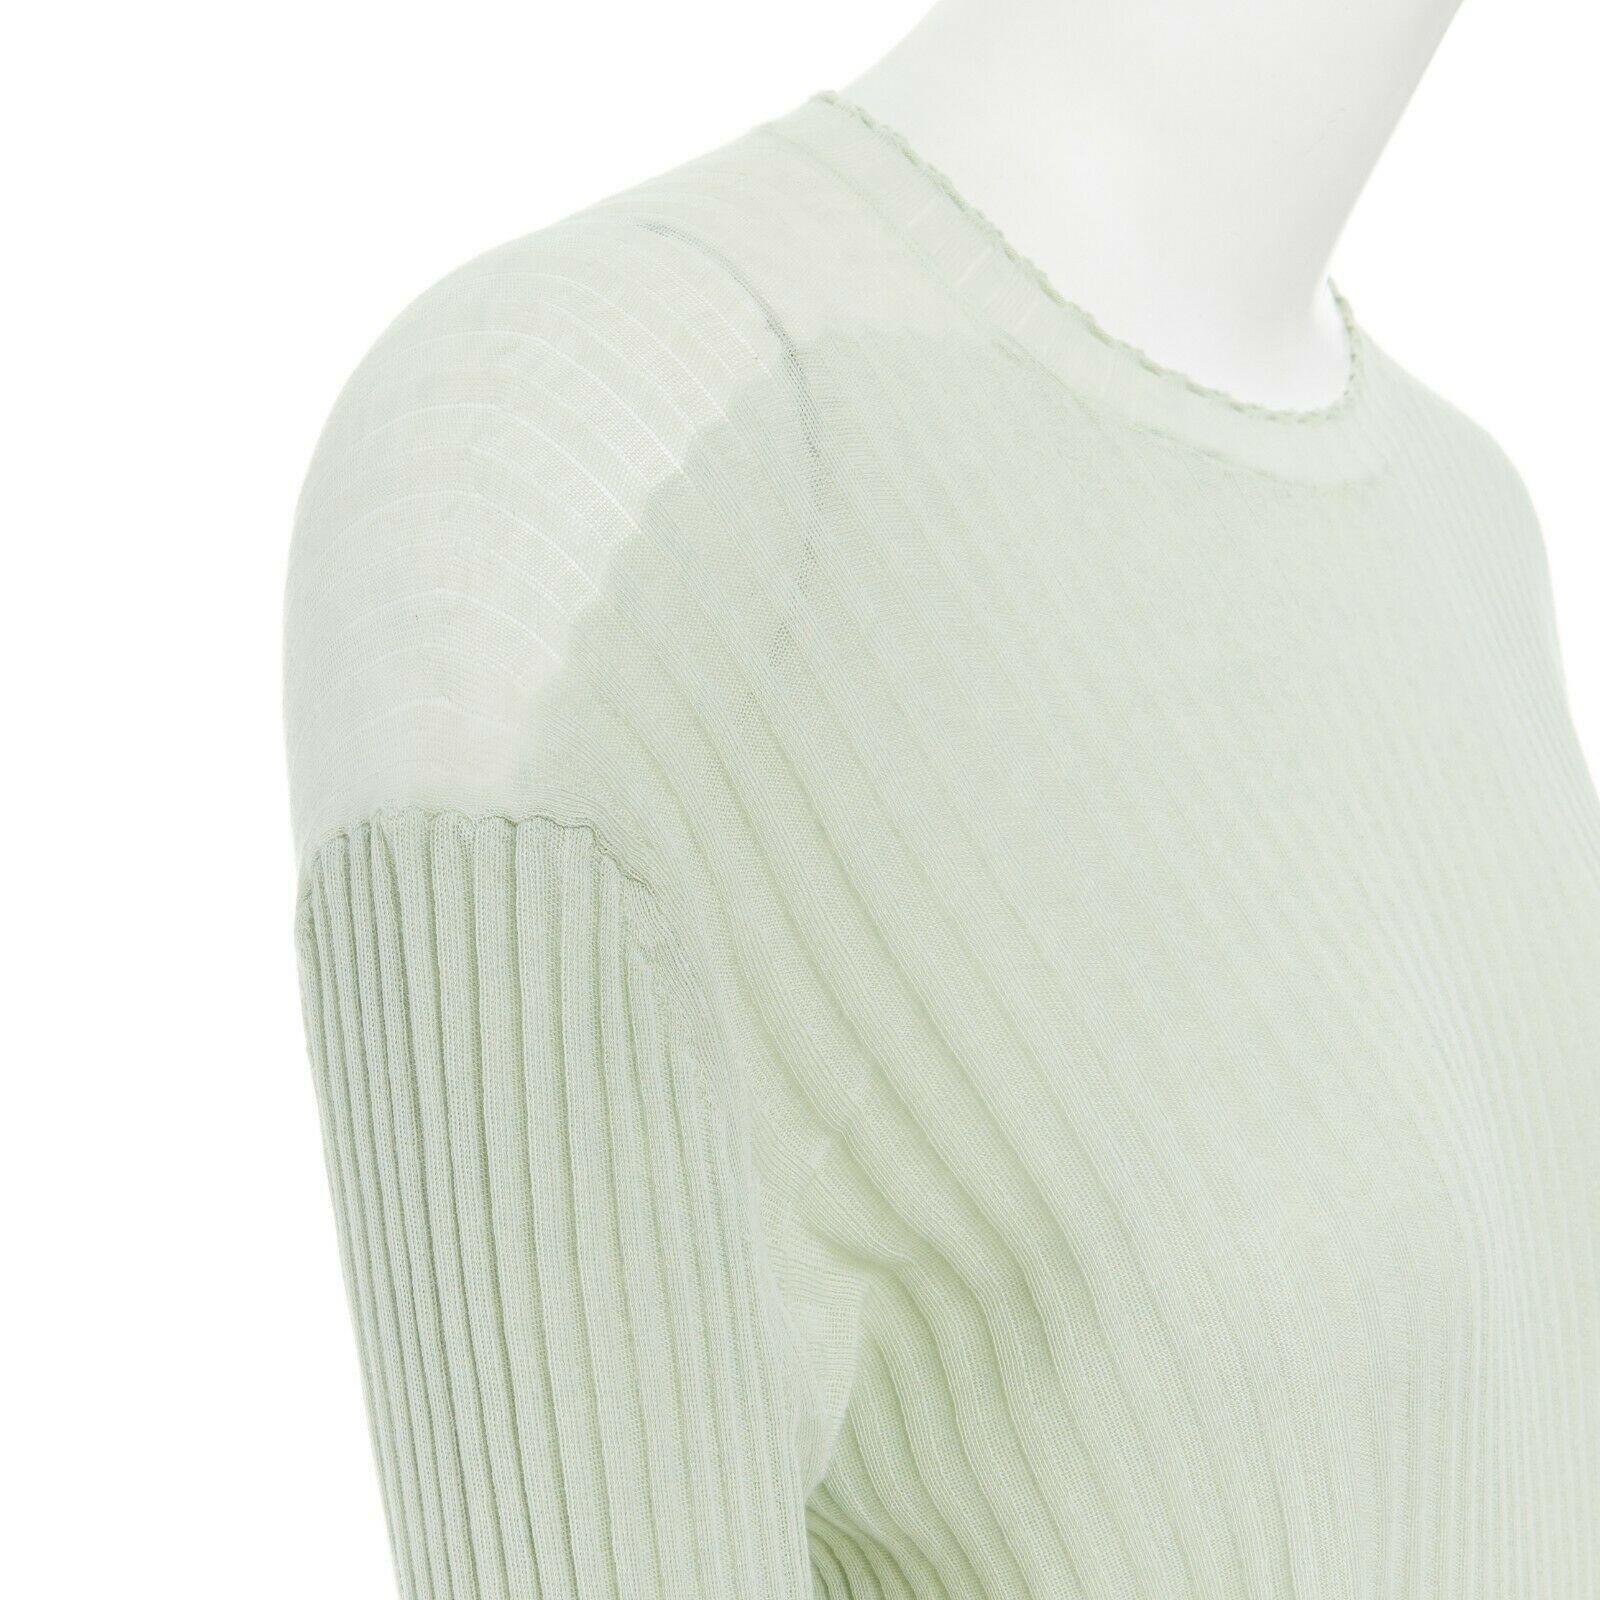 CELINE PHOEBE PHILO mint green ribbed sheer back step hem sweater top M

CELINE BY PHOEBE PHILO
100% cotton. Mint green. Round neck. Dropped shoulder. Extra long sleeves. White ribbing detail at cuff. Slightly sheer detail along shoulders. Contrast